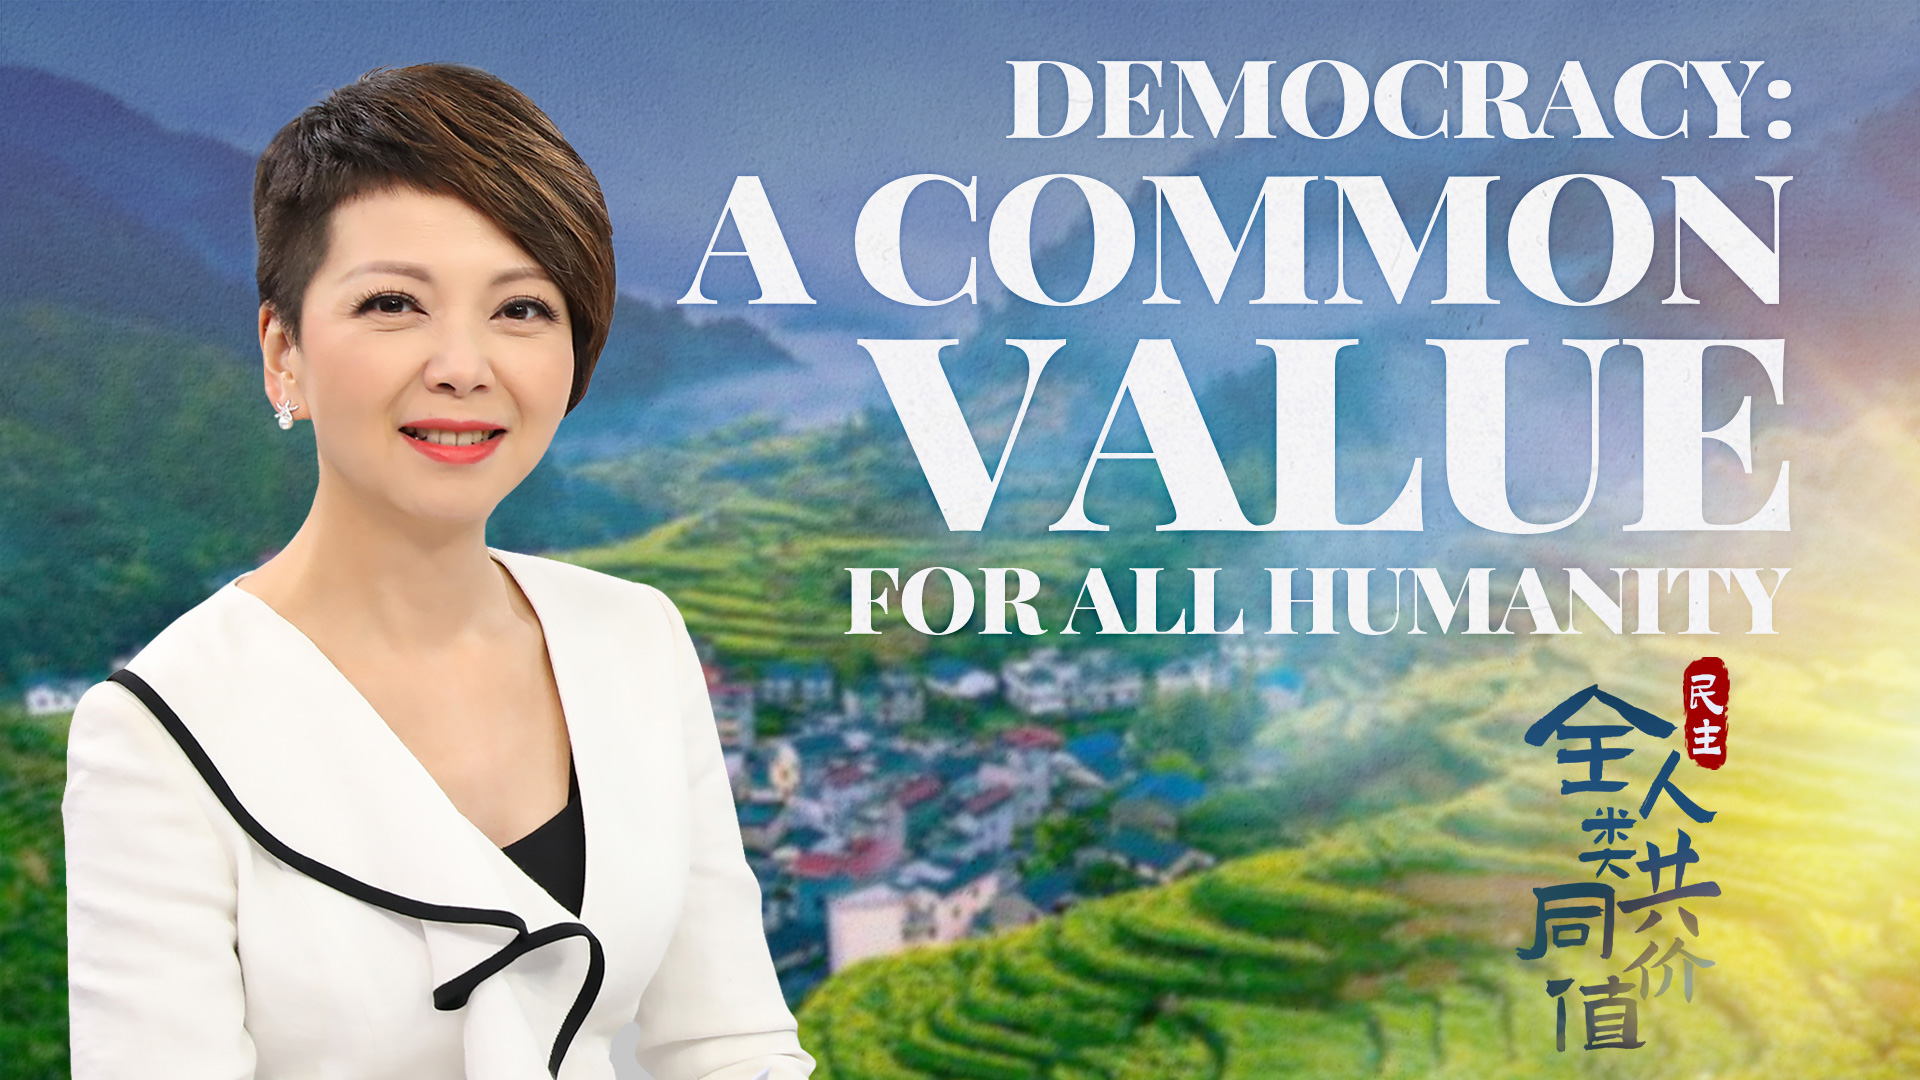 Watch: Democracy: A common value for all humanity